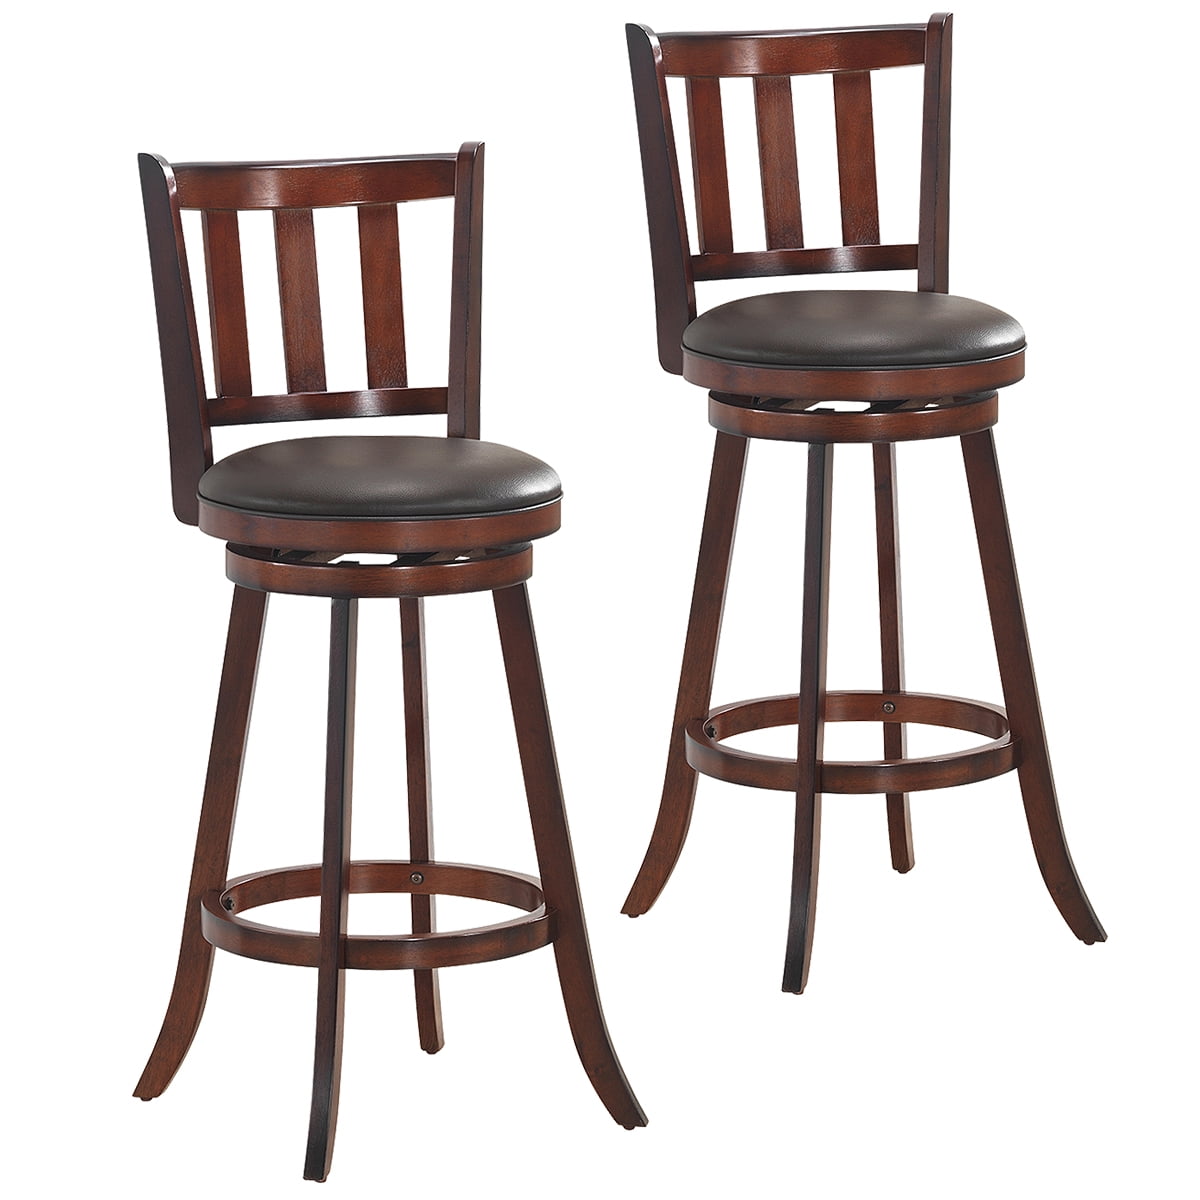 Set Of 2 Windsor Leather Bar Stools Breakfast Bar Kitchen Chairs Gas Lift 